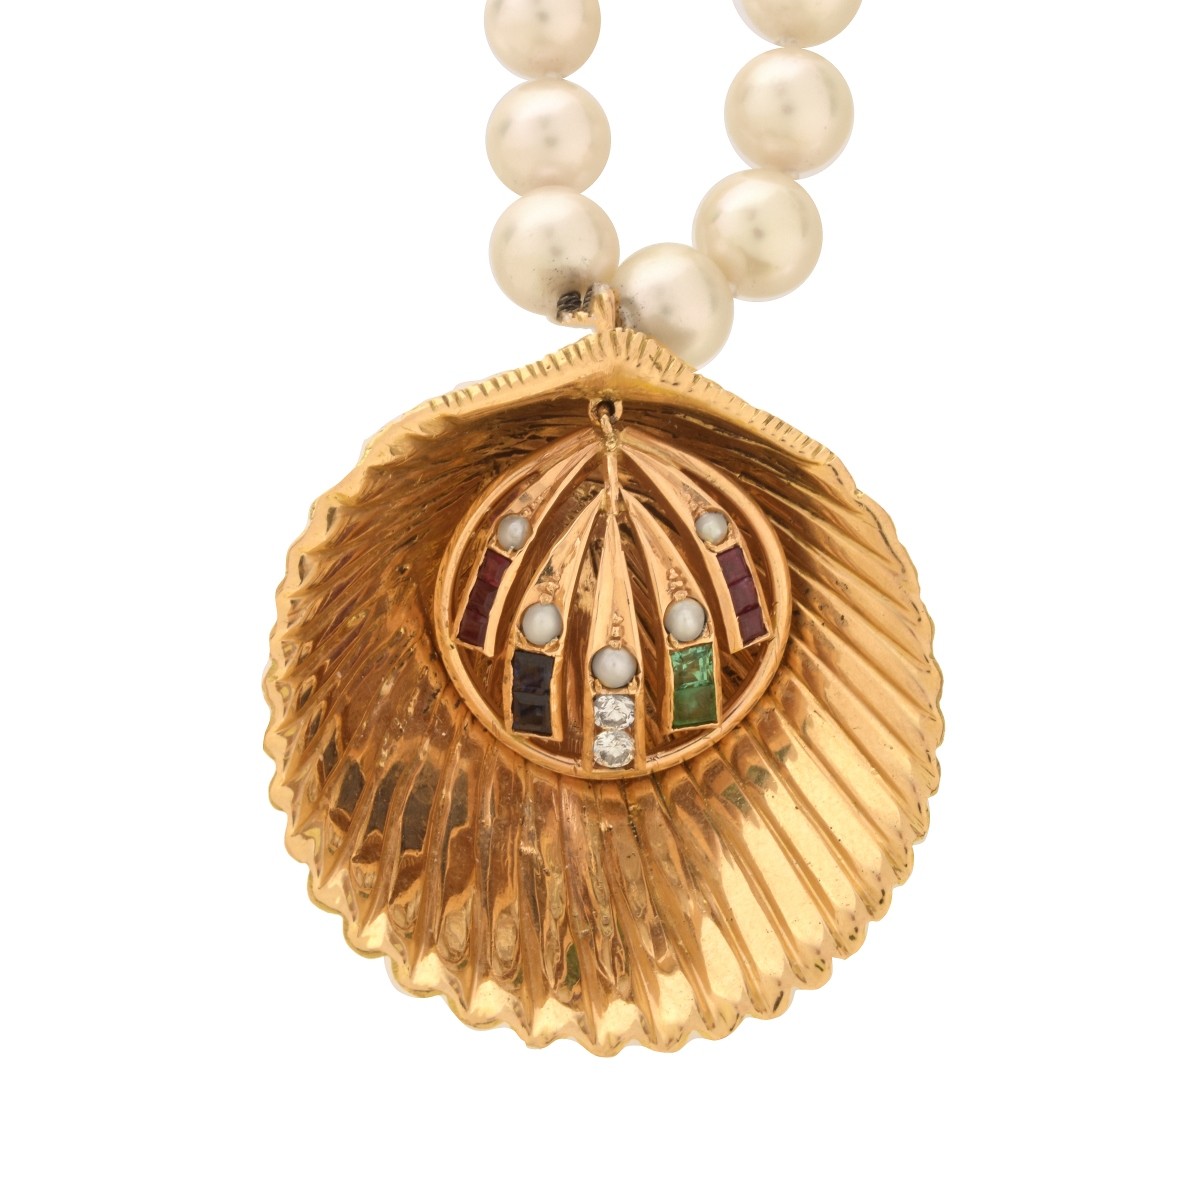 Vintage Pearl, Gemstone and 18K Pendant Necklace